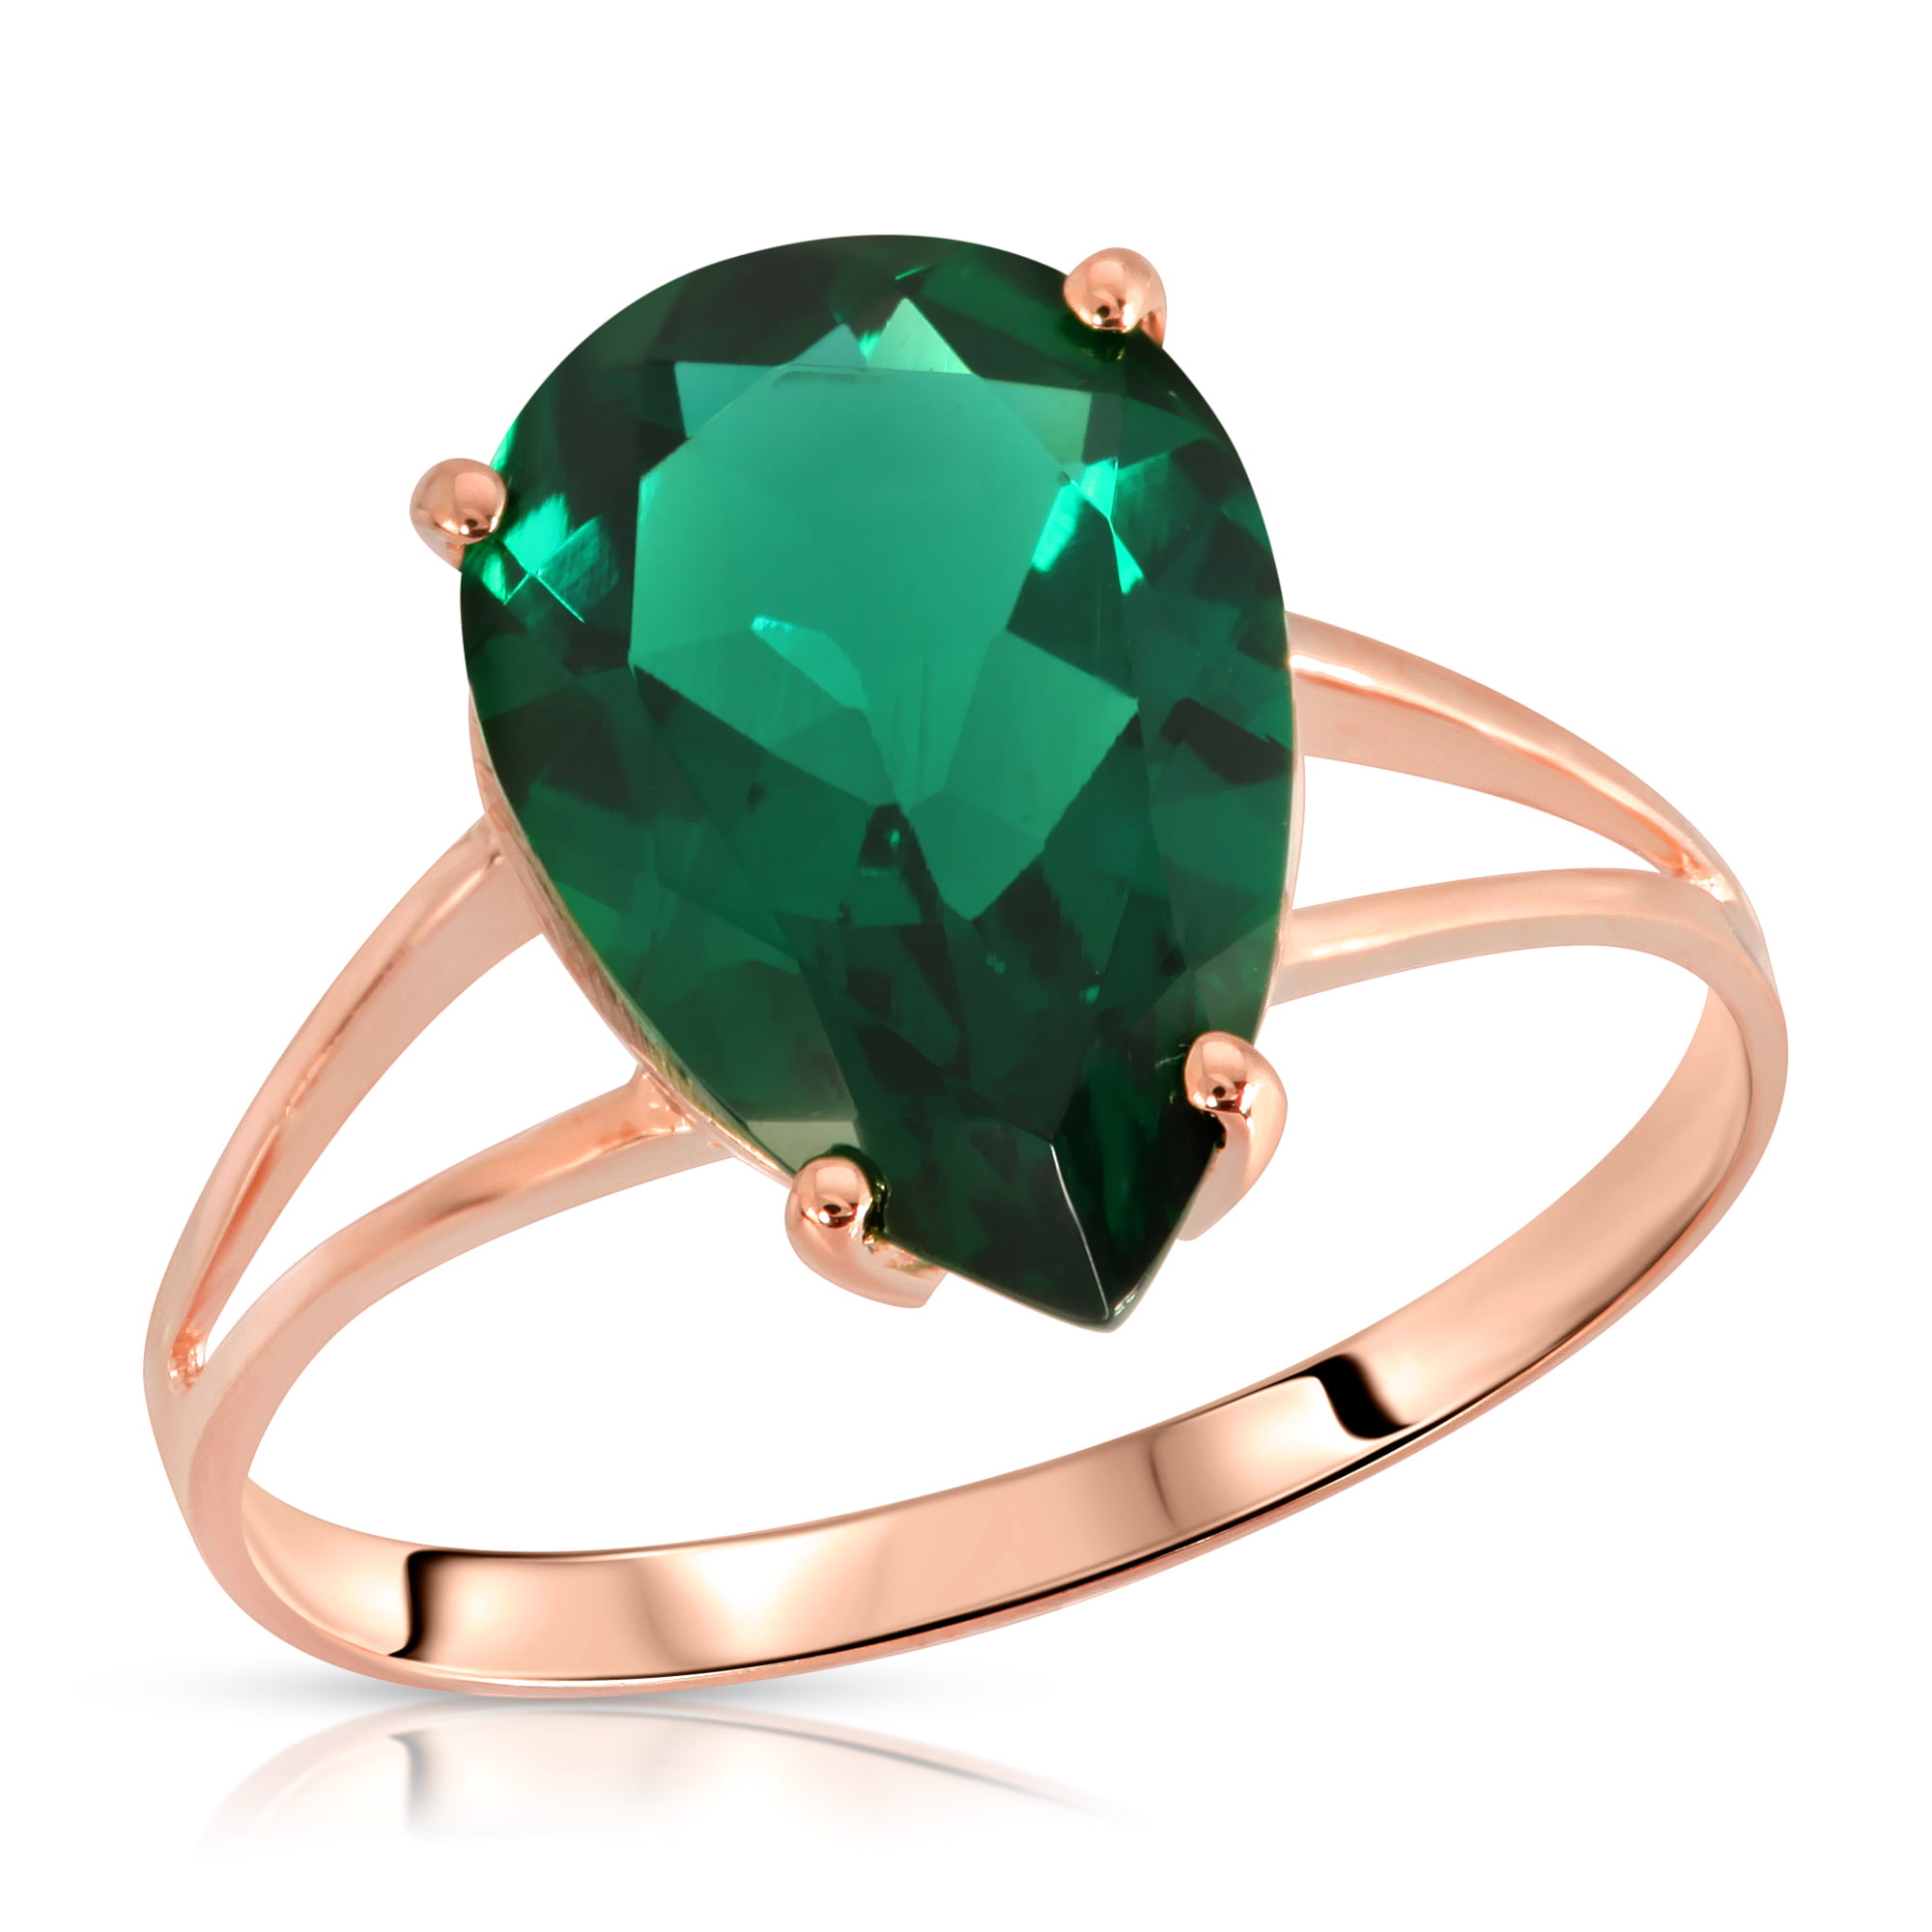 14k&18k Pear Cut Emerald Ring  Genuine Emerald Ring  Gold Emerald Ring Green Emerald Ring Available in Gold Rose Gold and White Gold